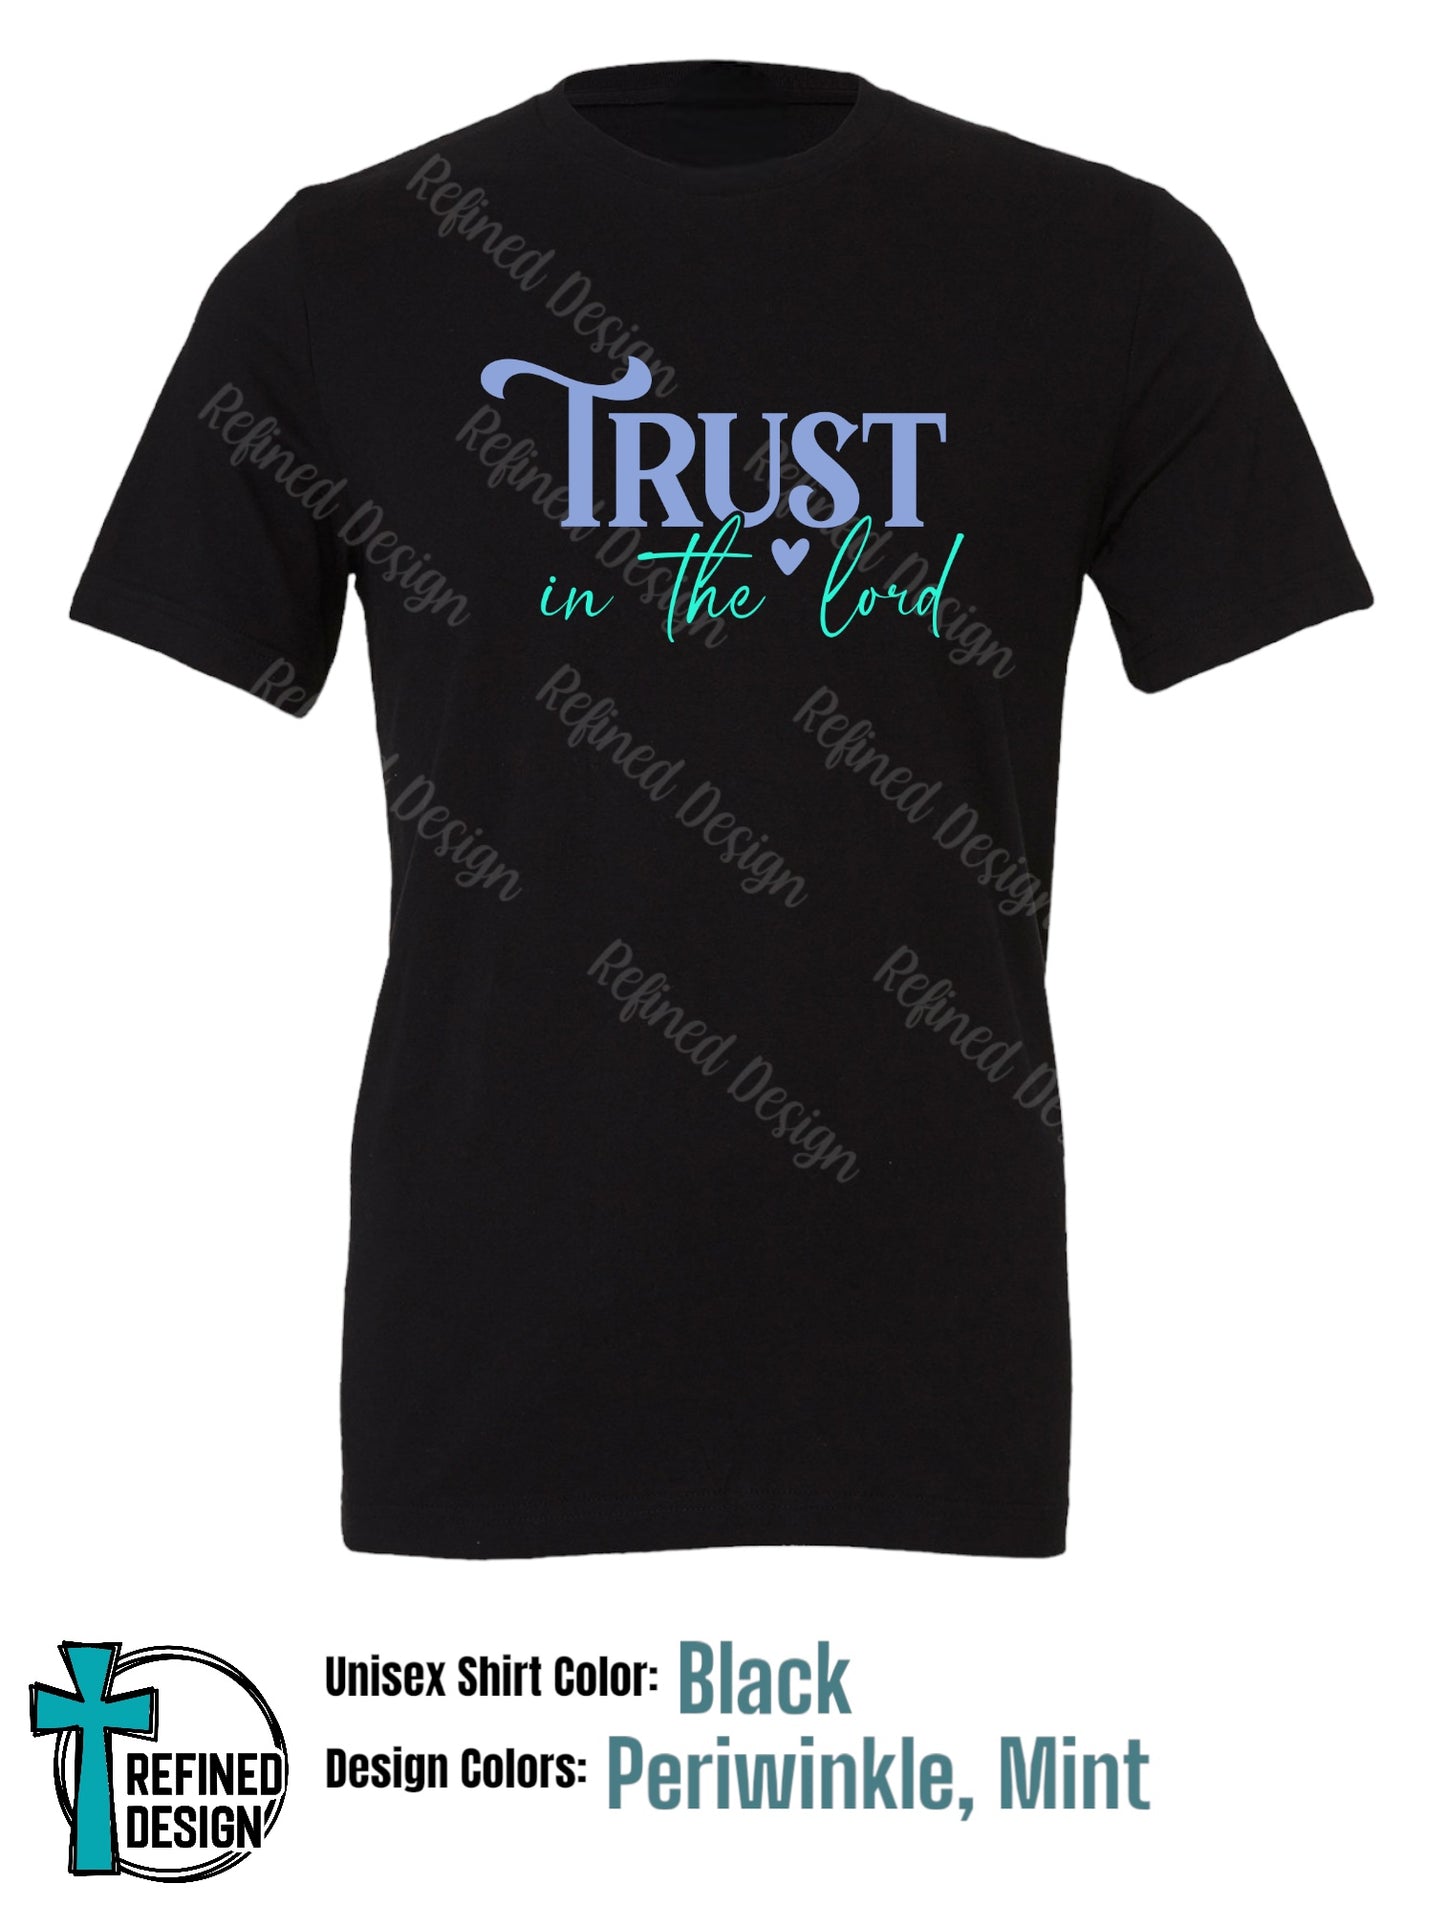 “Trust in the Lord” T-Shirt